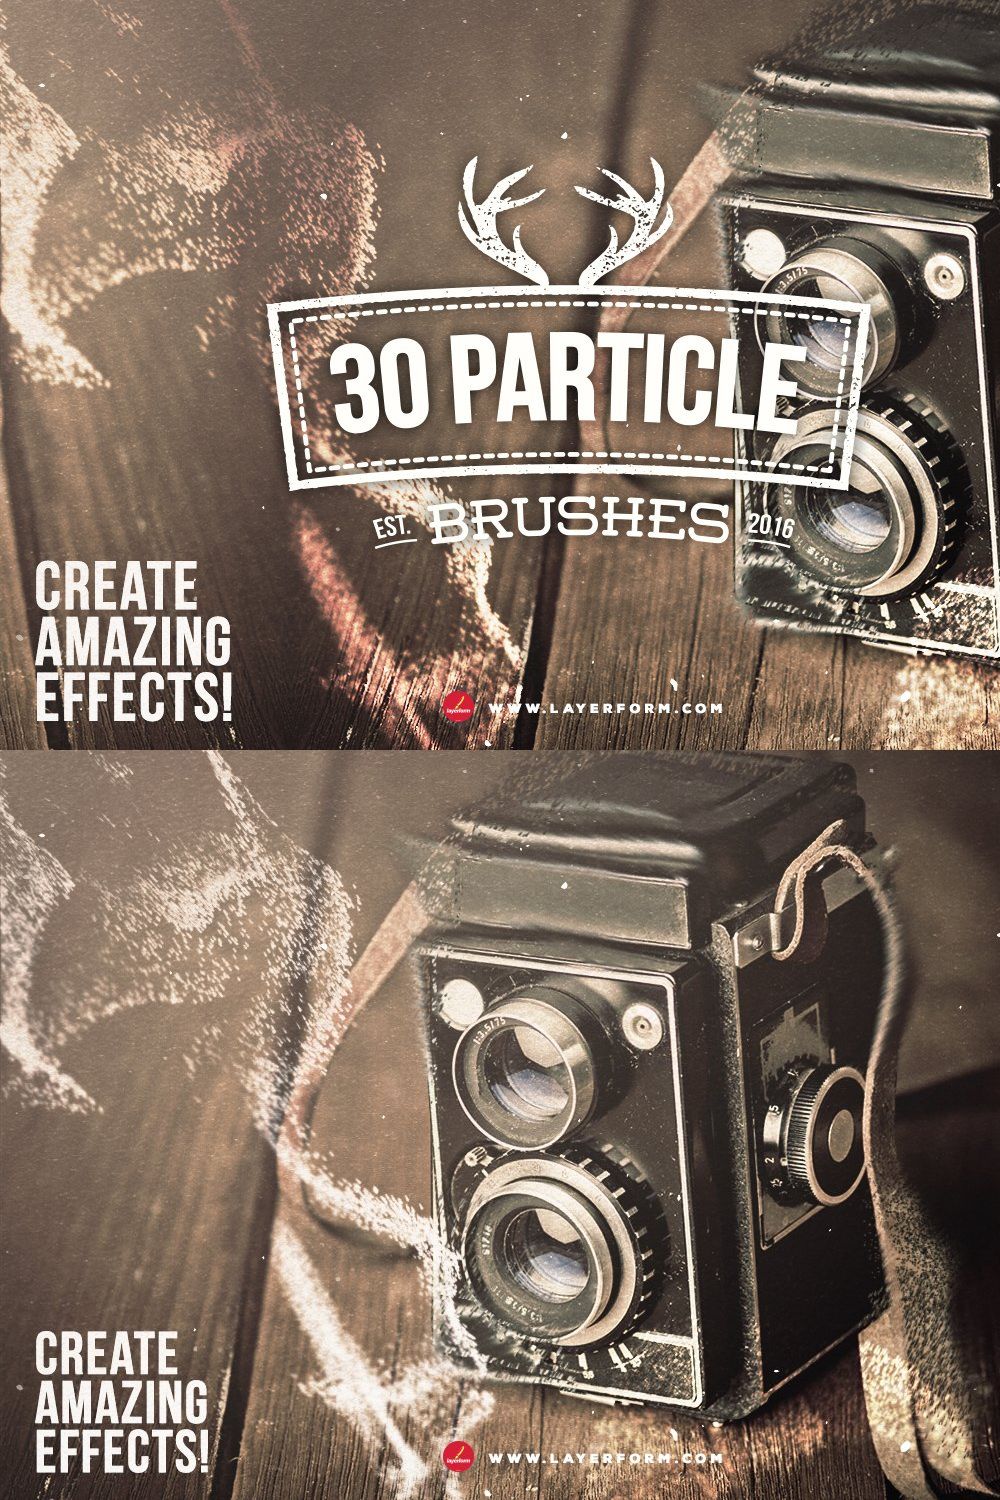 30 Particle Brushes pinterest preview image.